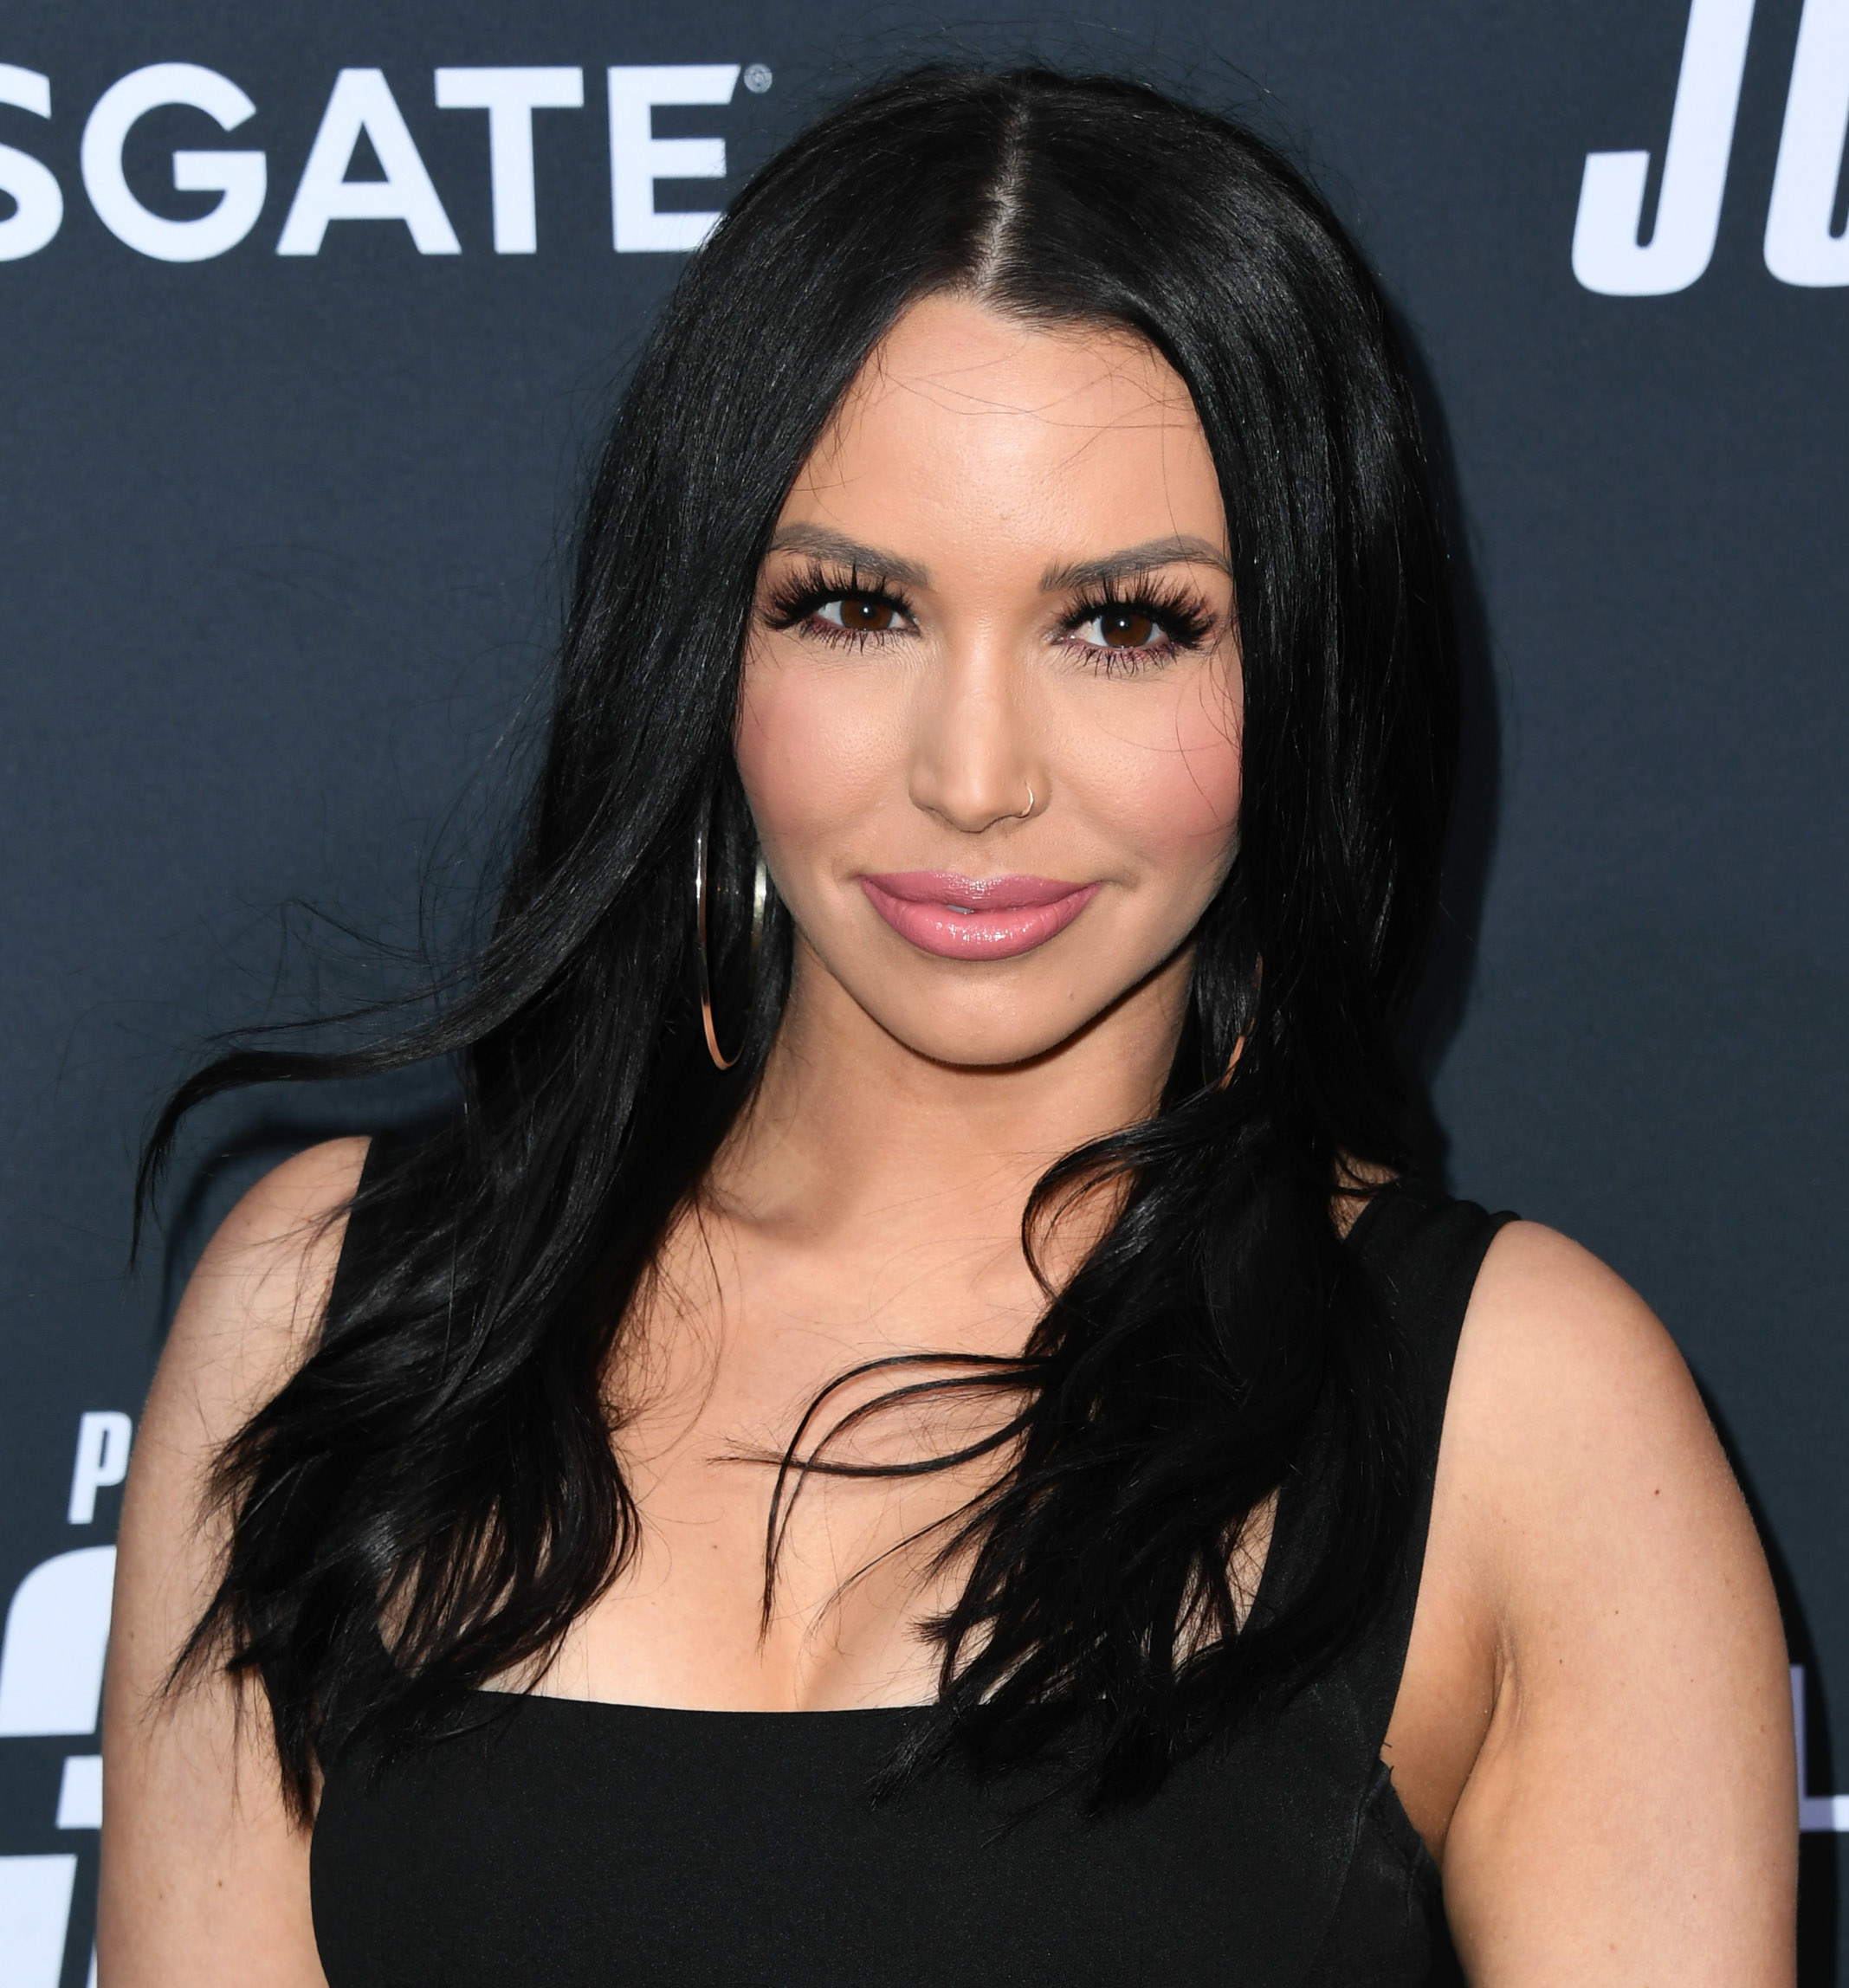 Scheana Shay poses at a movie premiere, with massive eyelashes and big lips